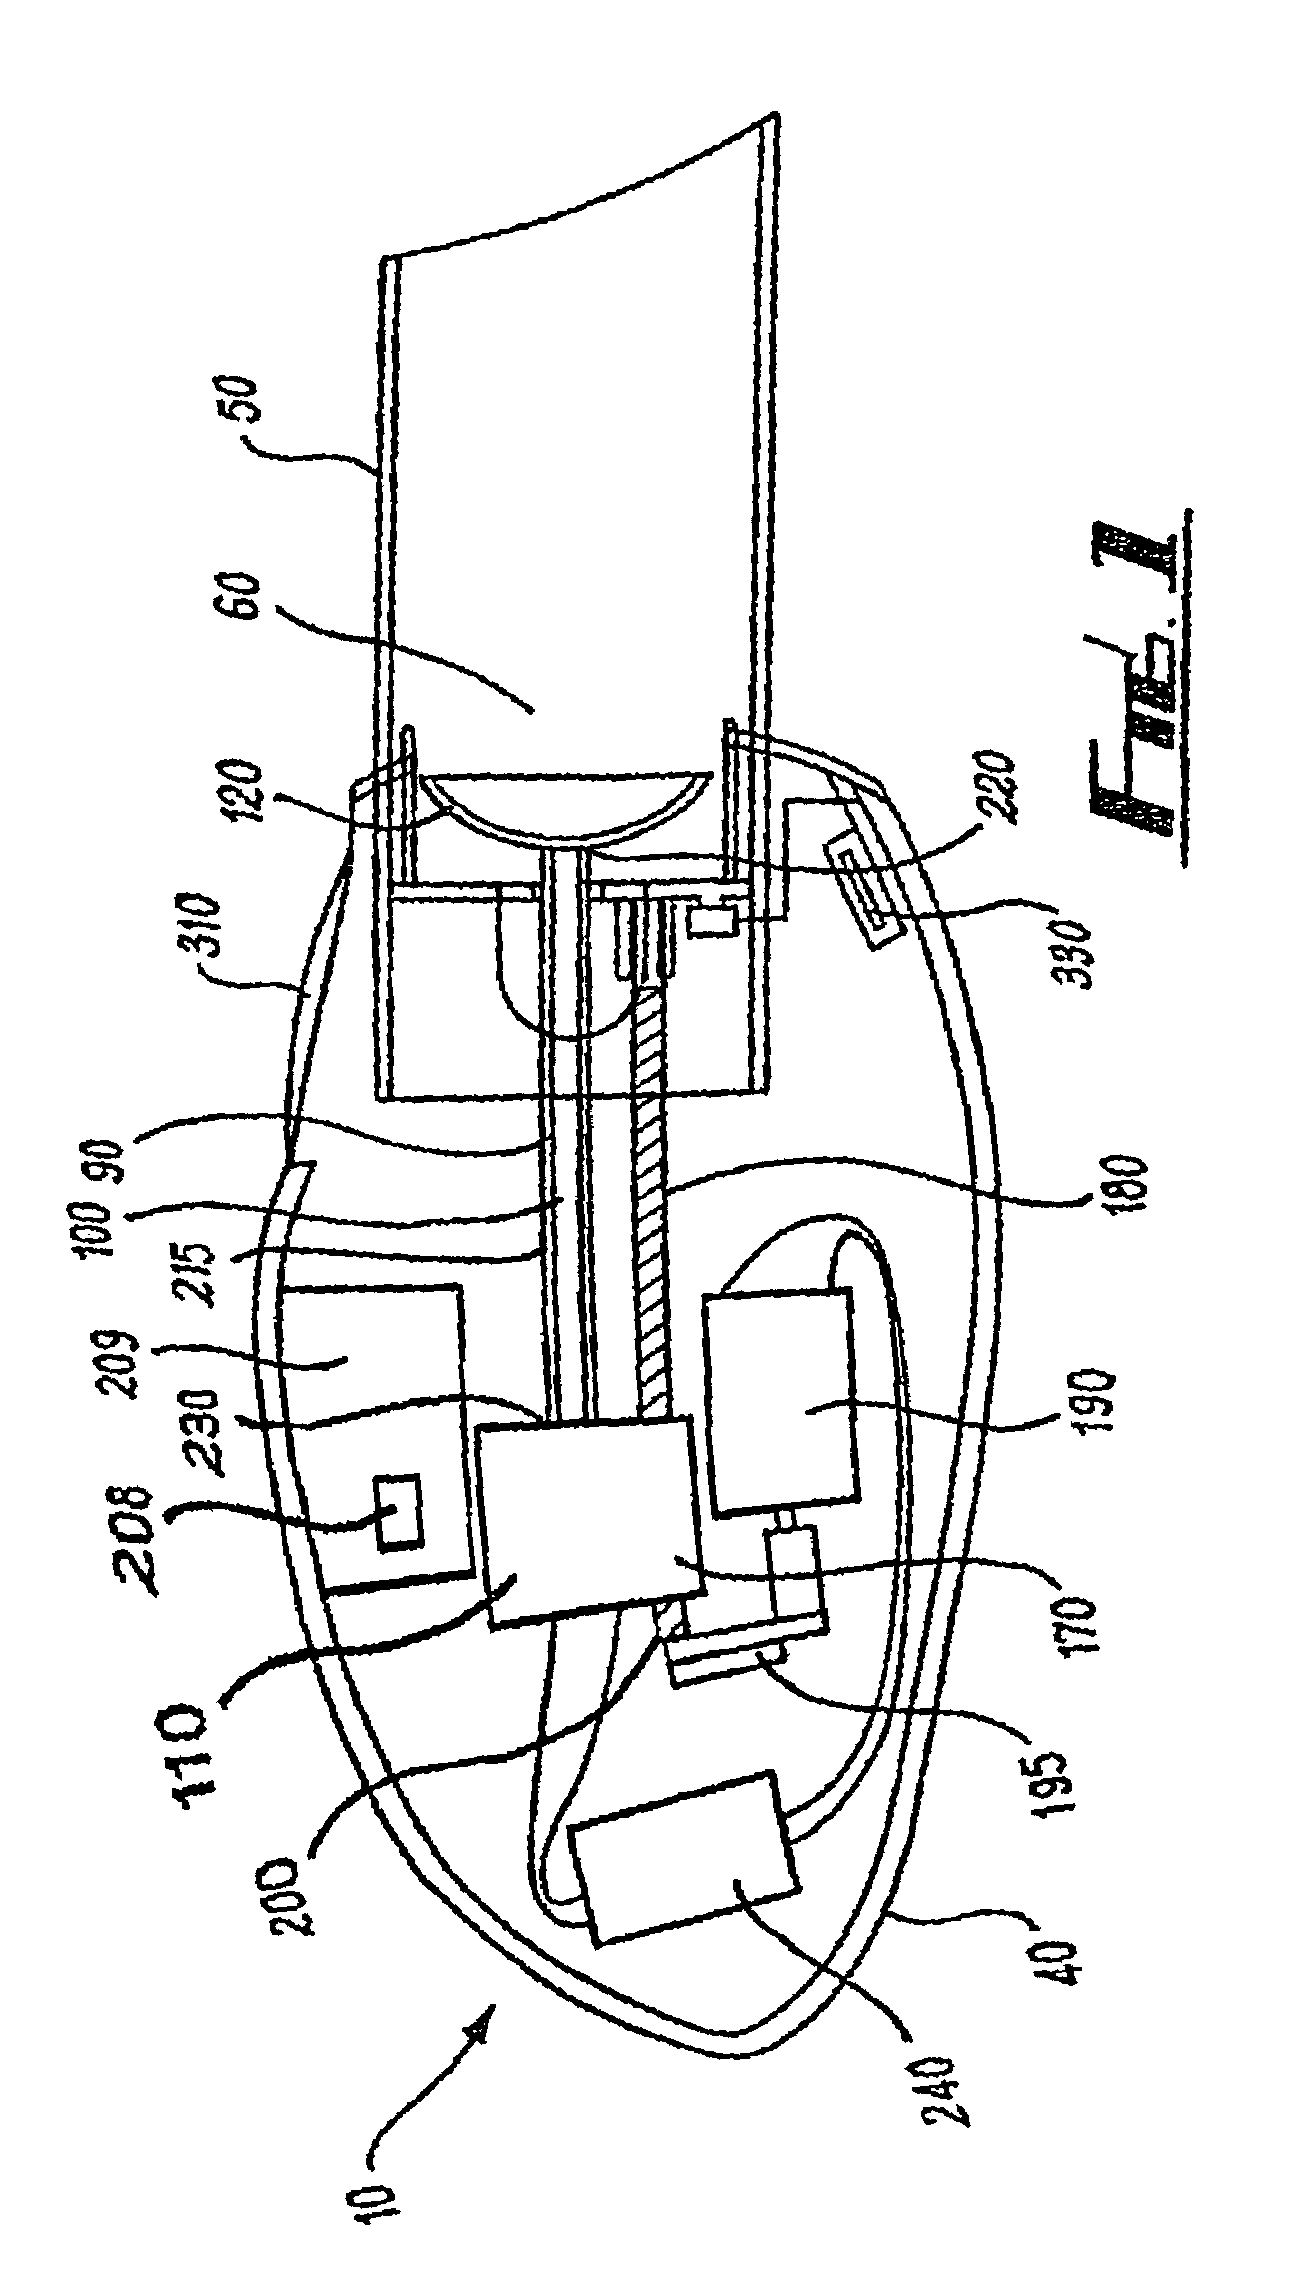 Contact lens manipulation and cleaning apparatus